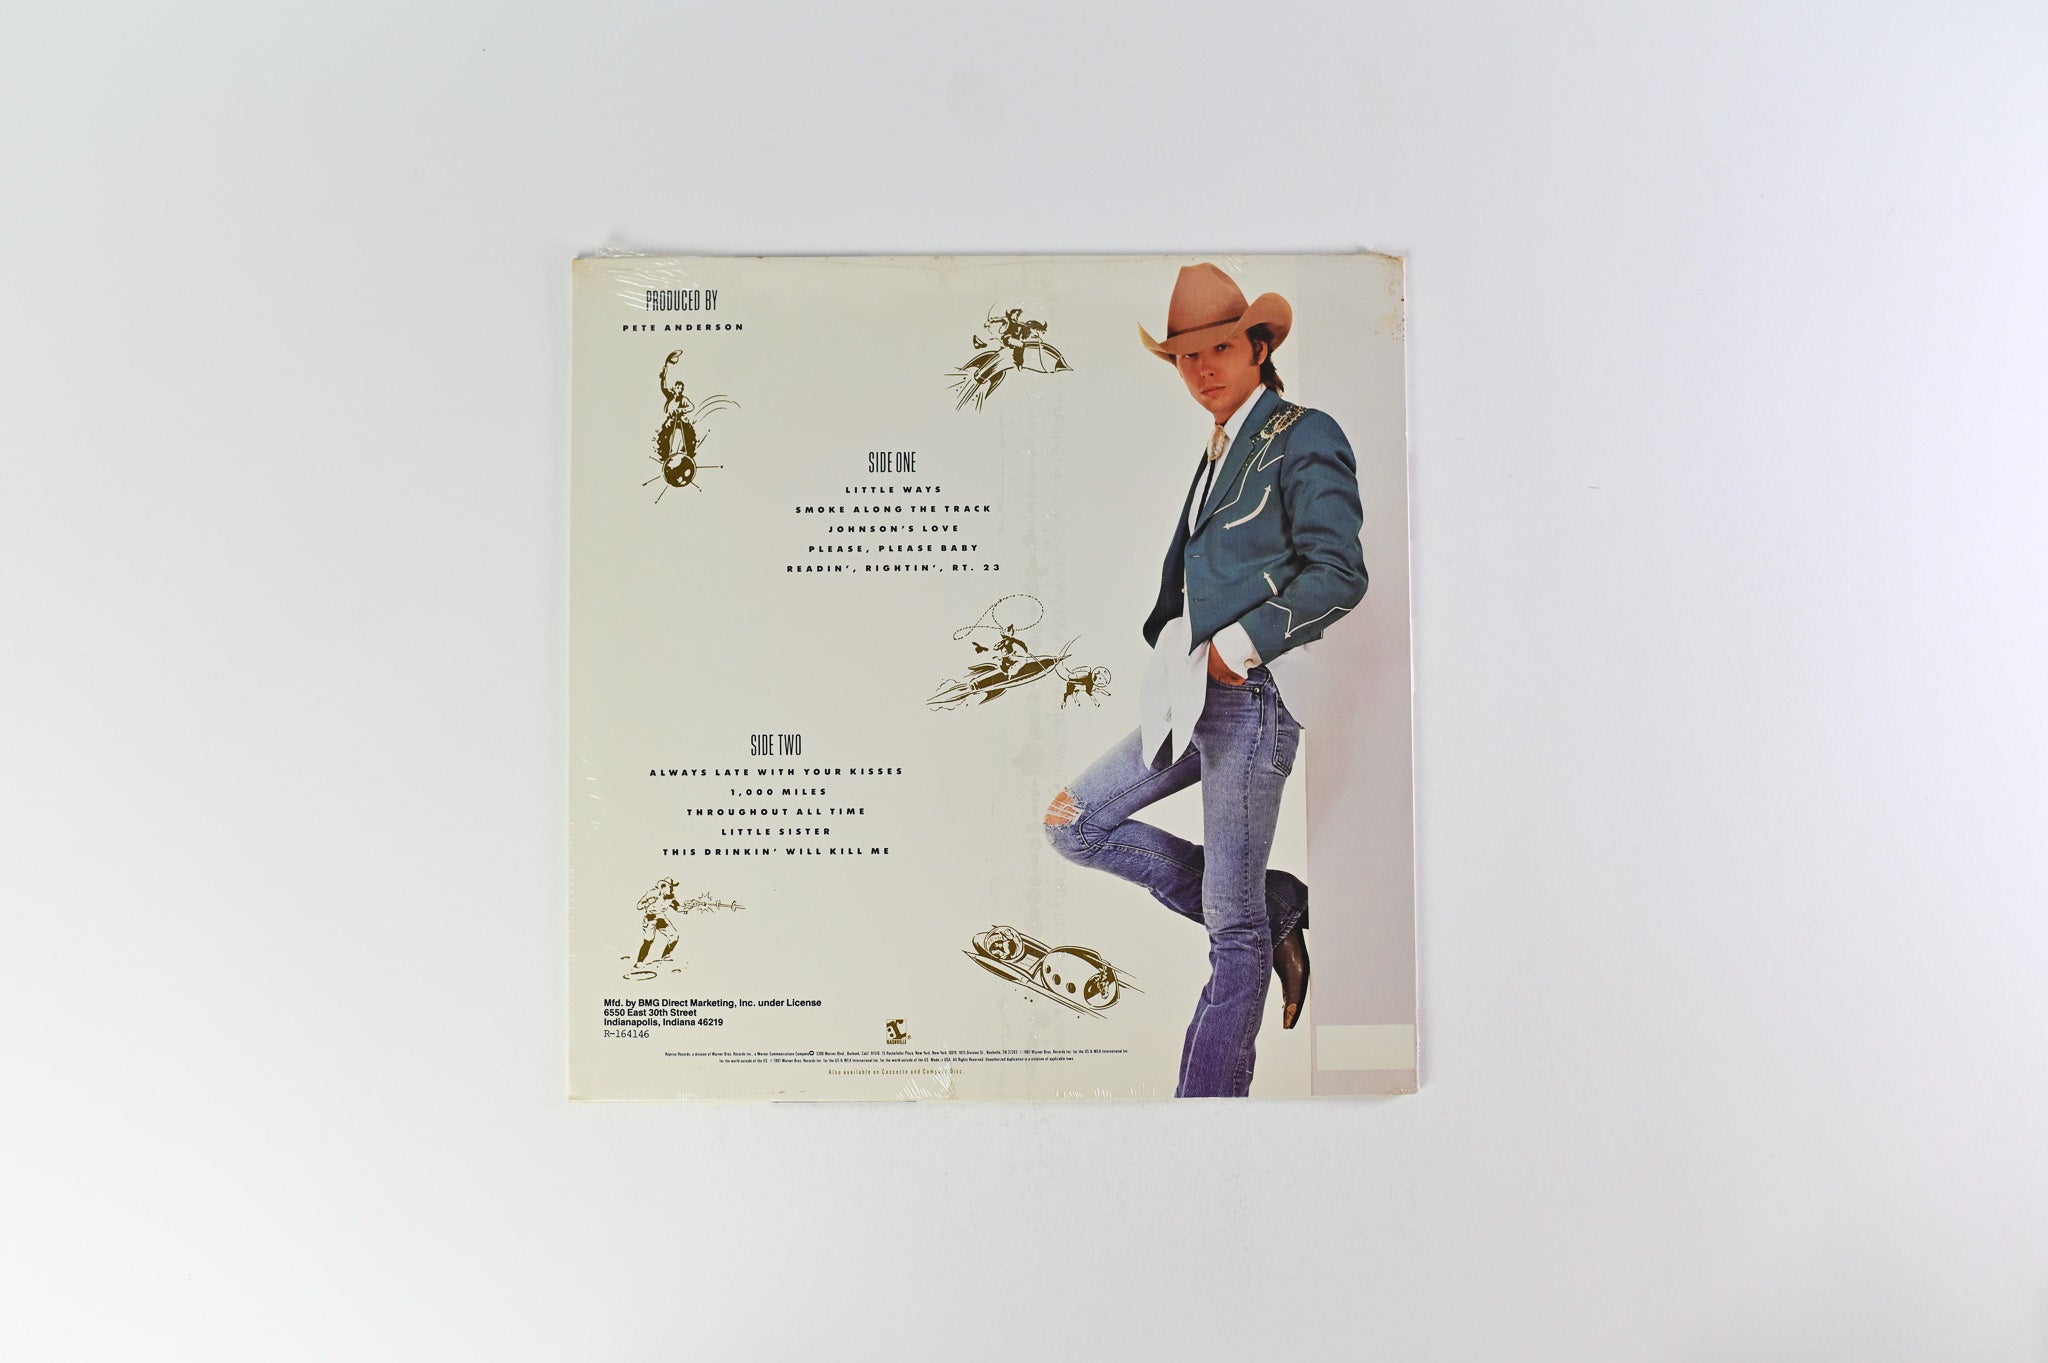 Dwight Yoakam - Hillbilly DeLuxe on Reprise Club Pressing Sealed